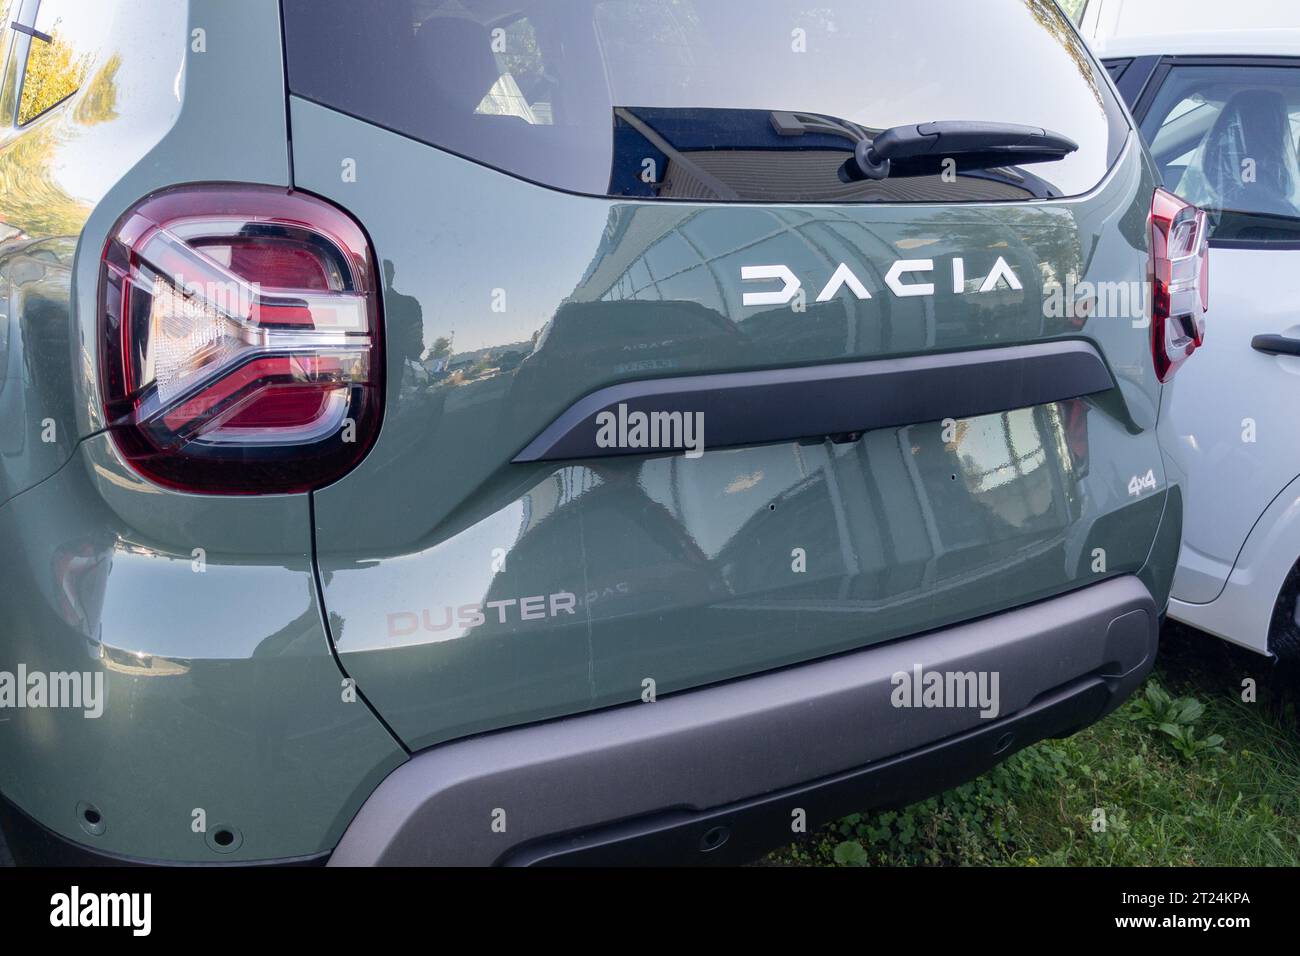 Bordeaux , France - 10 06 2023 : Dacia duster car logo brand new rear sign text detail on modern suv vehicle Romania manufacturer by renault Stock Photo